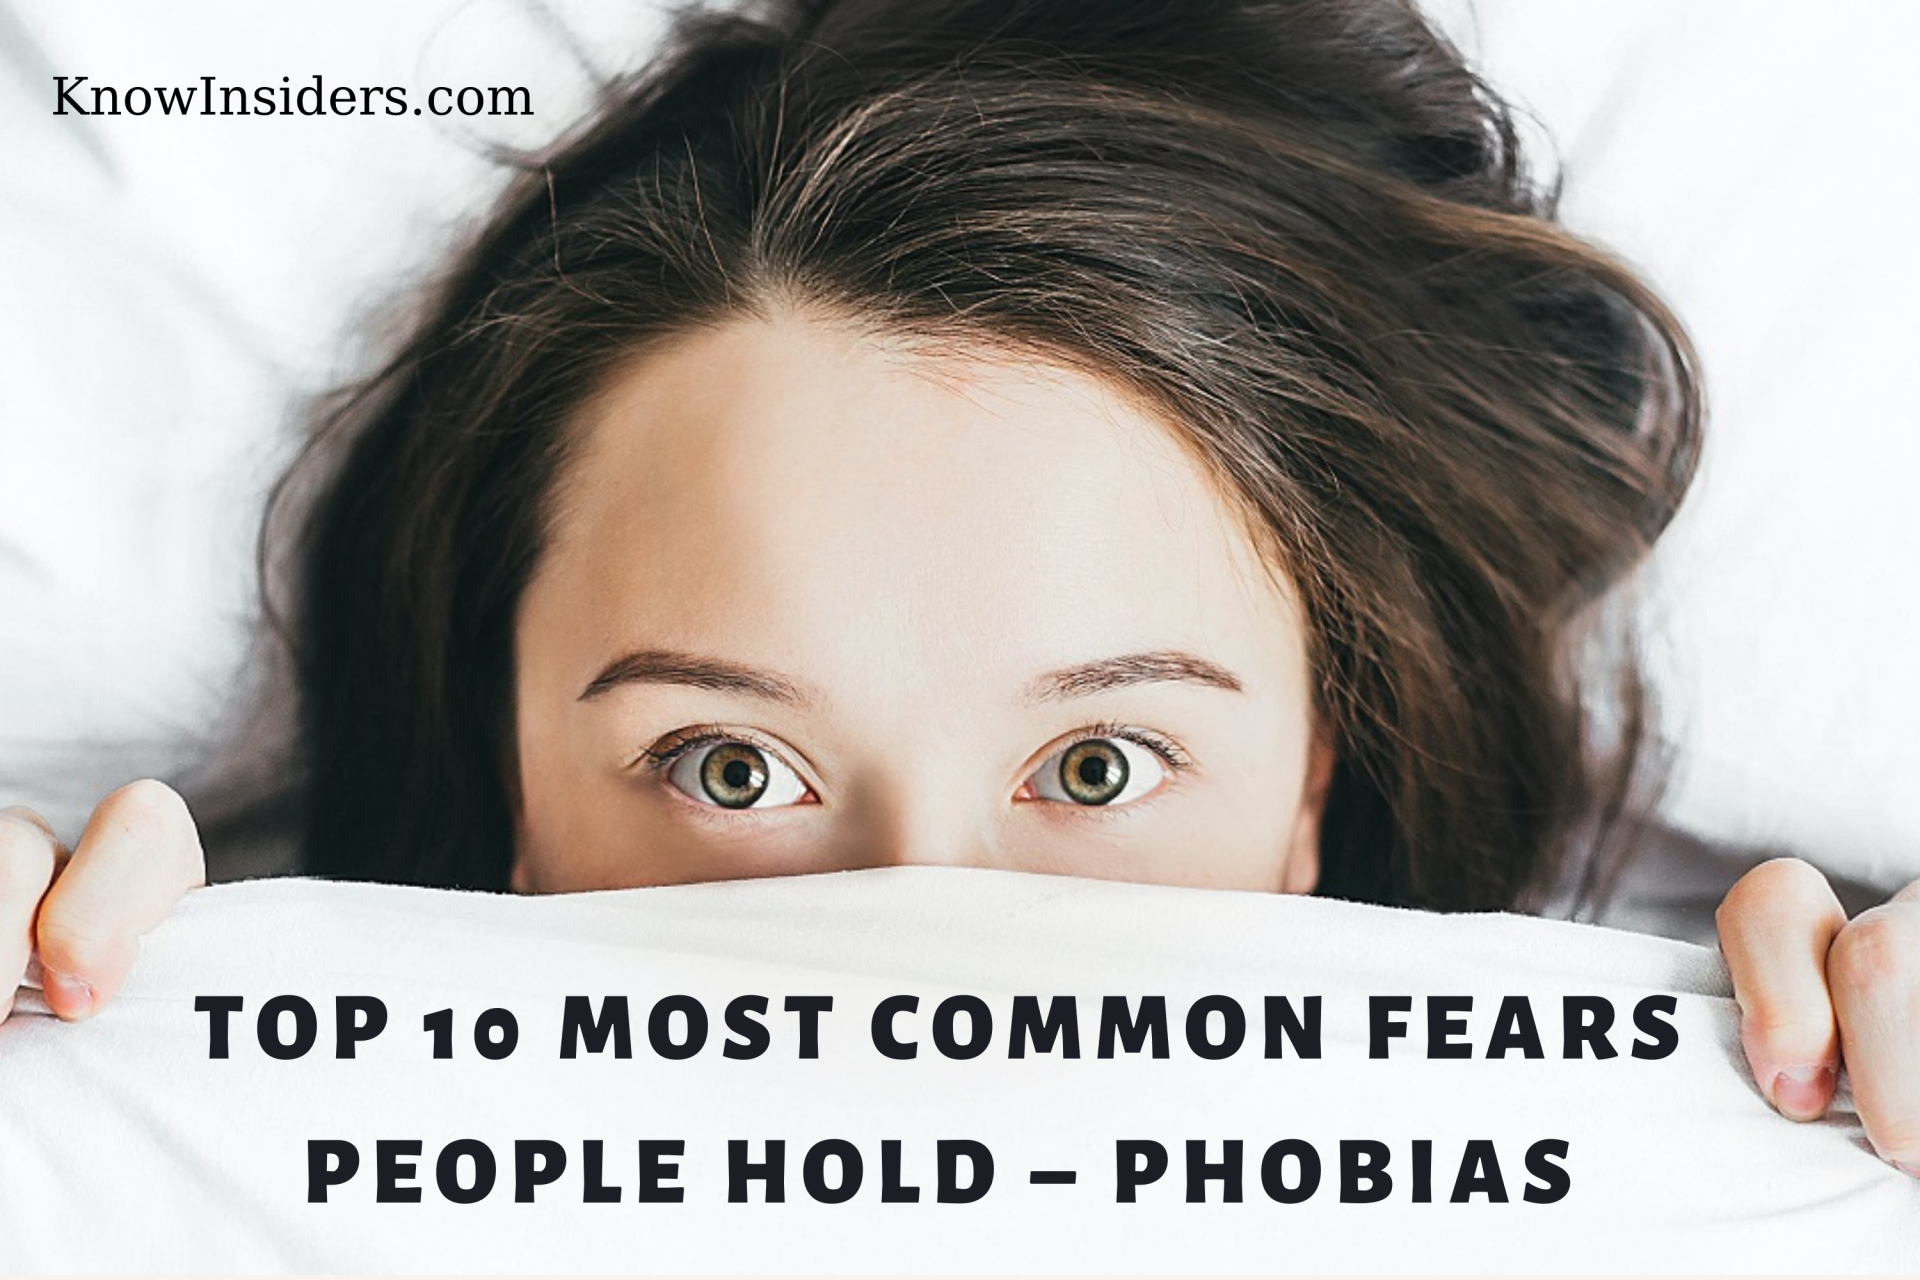 Phobias Top 10 Most Common Fears People Hold KnowInsiders